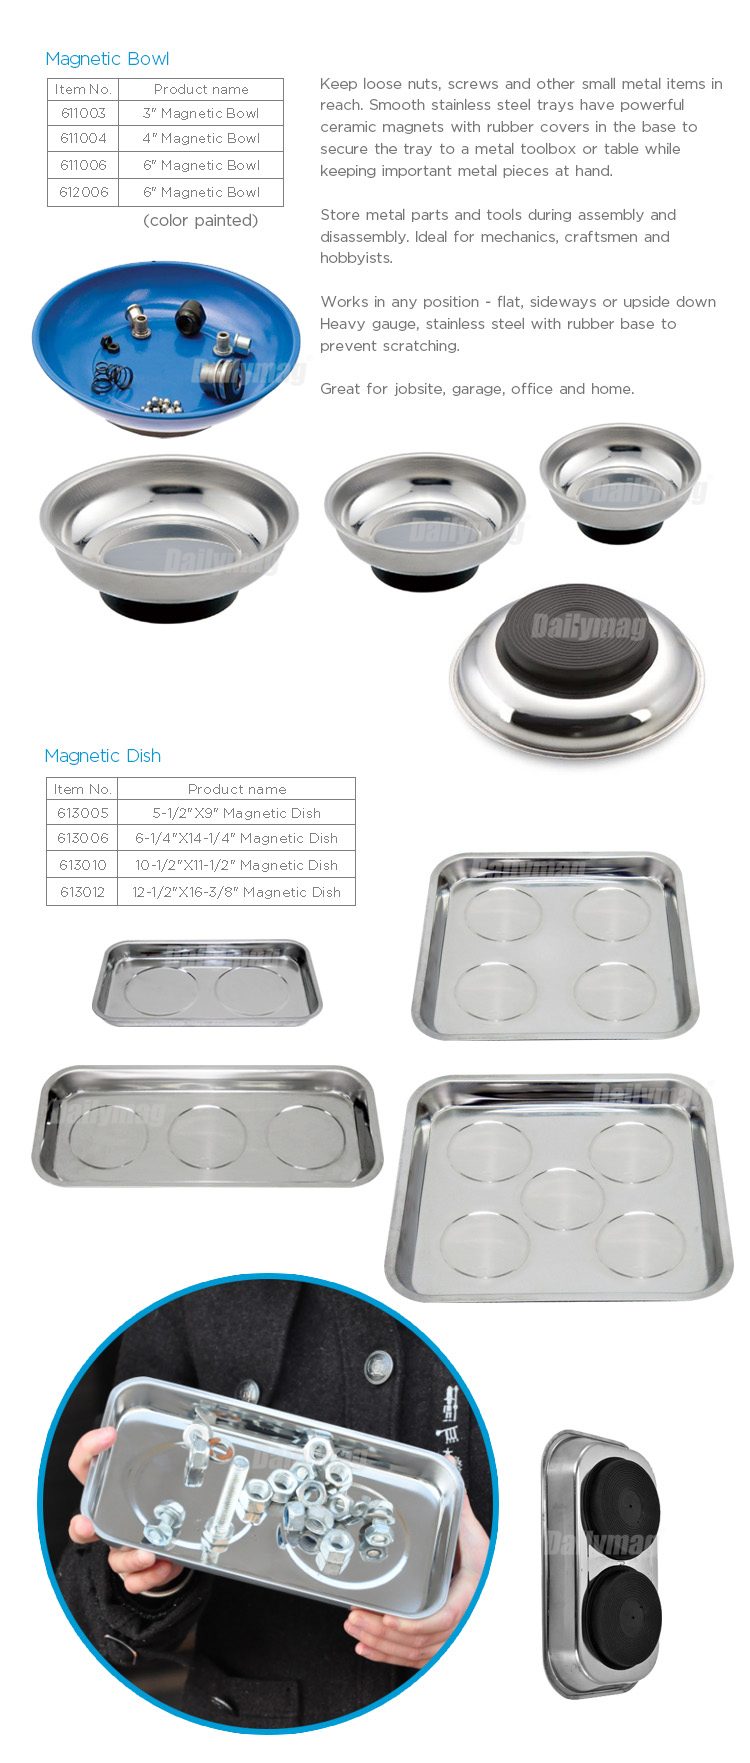 Magnetic containing tool,magnetic bowl,magnetic tray,magnetic plate --  Dailymag Magnetics